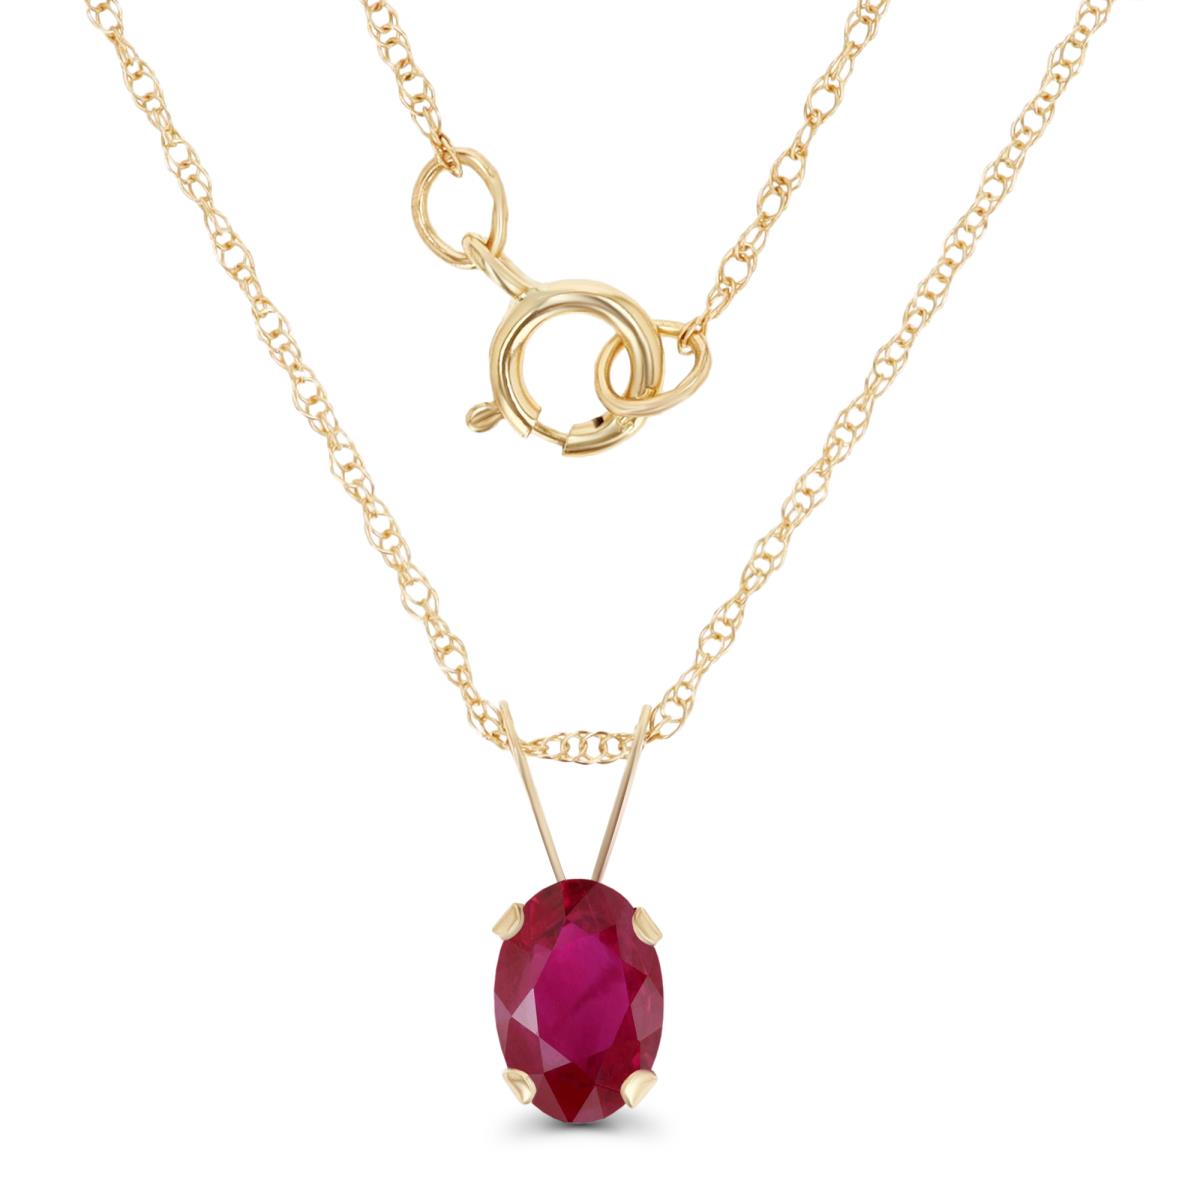 10K Yellow Gold 6x4mm Oval Glass Filled Ruby 18" Rope Chain Necklace